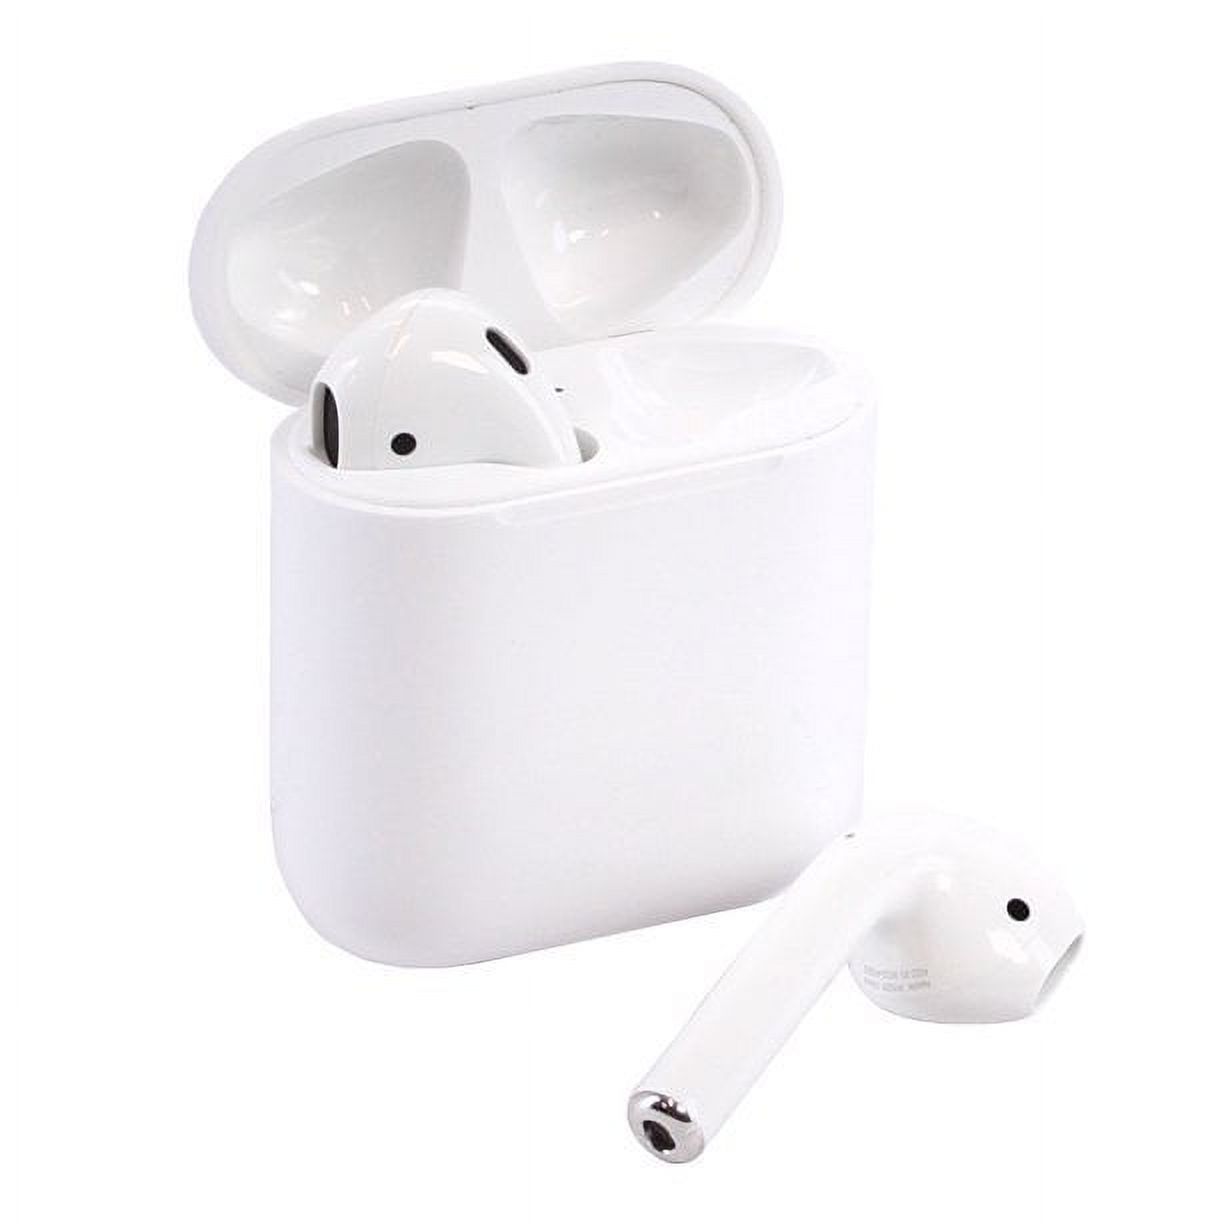 (Used) Apple AirPods Bluetooth Wireless Earphones w/ MFI Cable - White - image 1 of 3